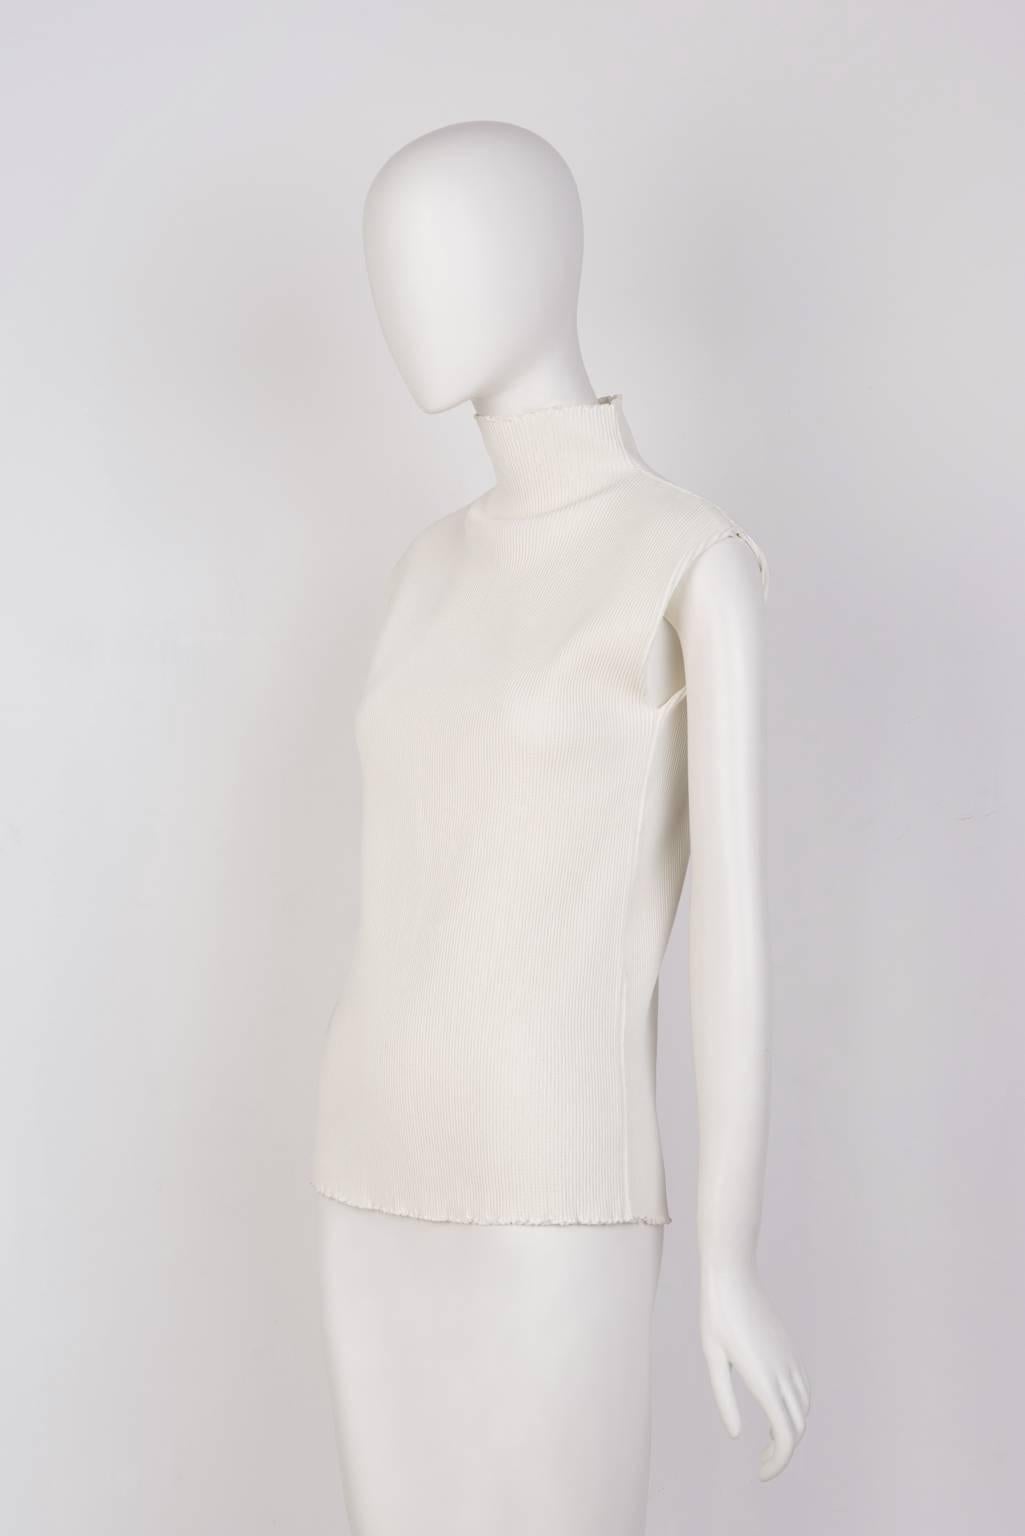  Sleeveless turtleneck in  ribbed, knit blend.